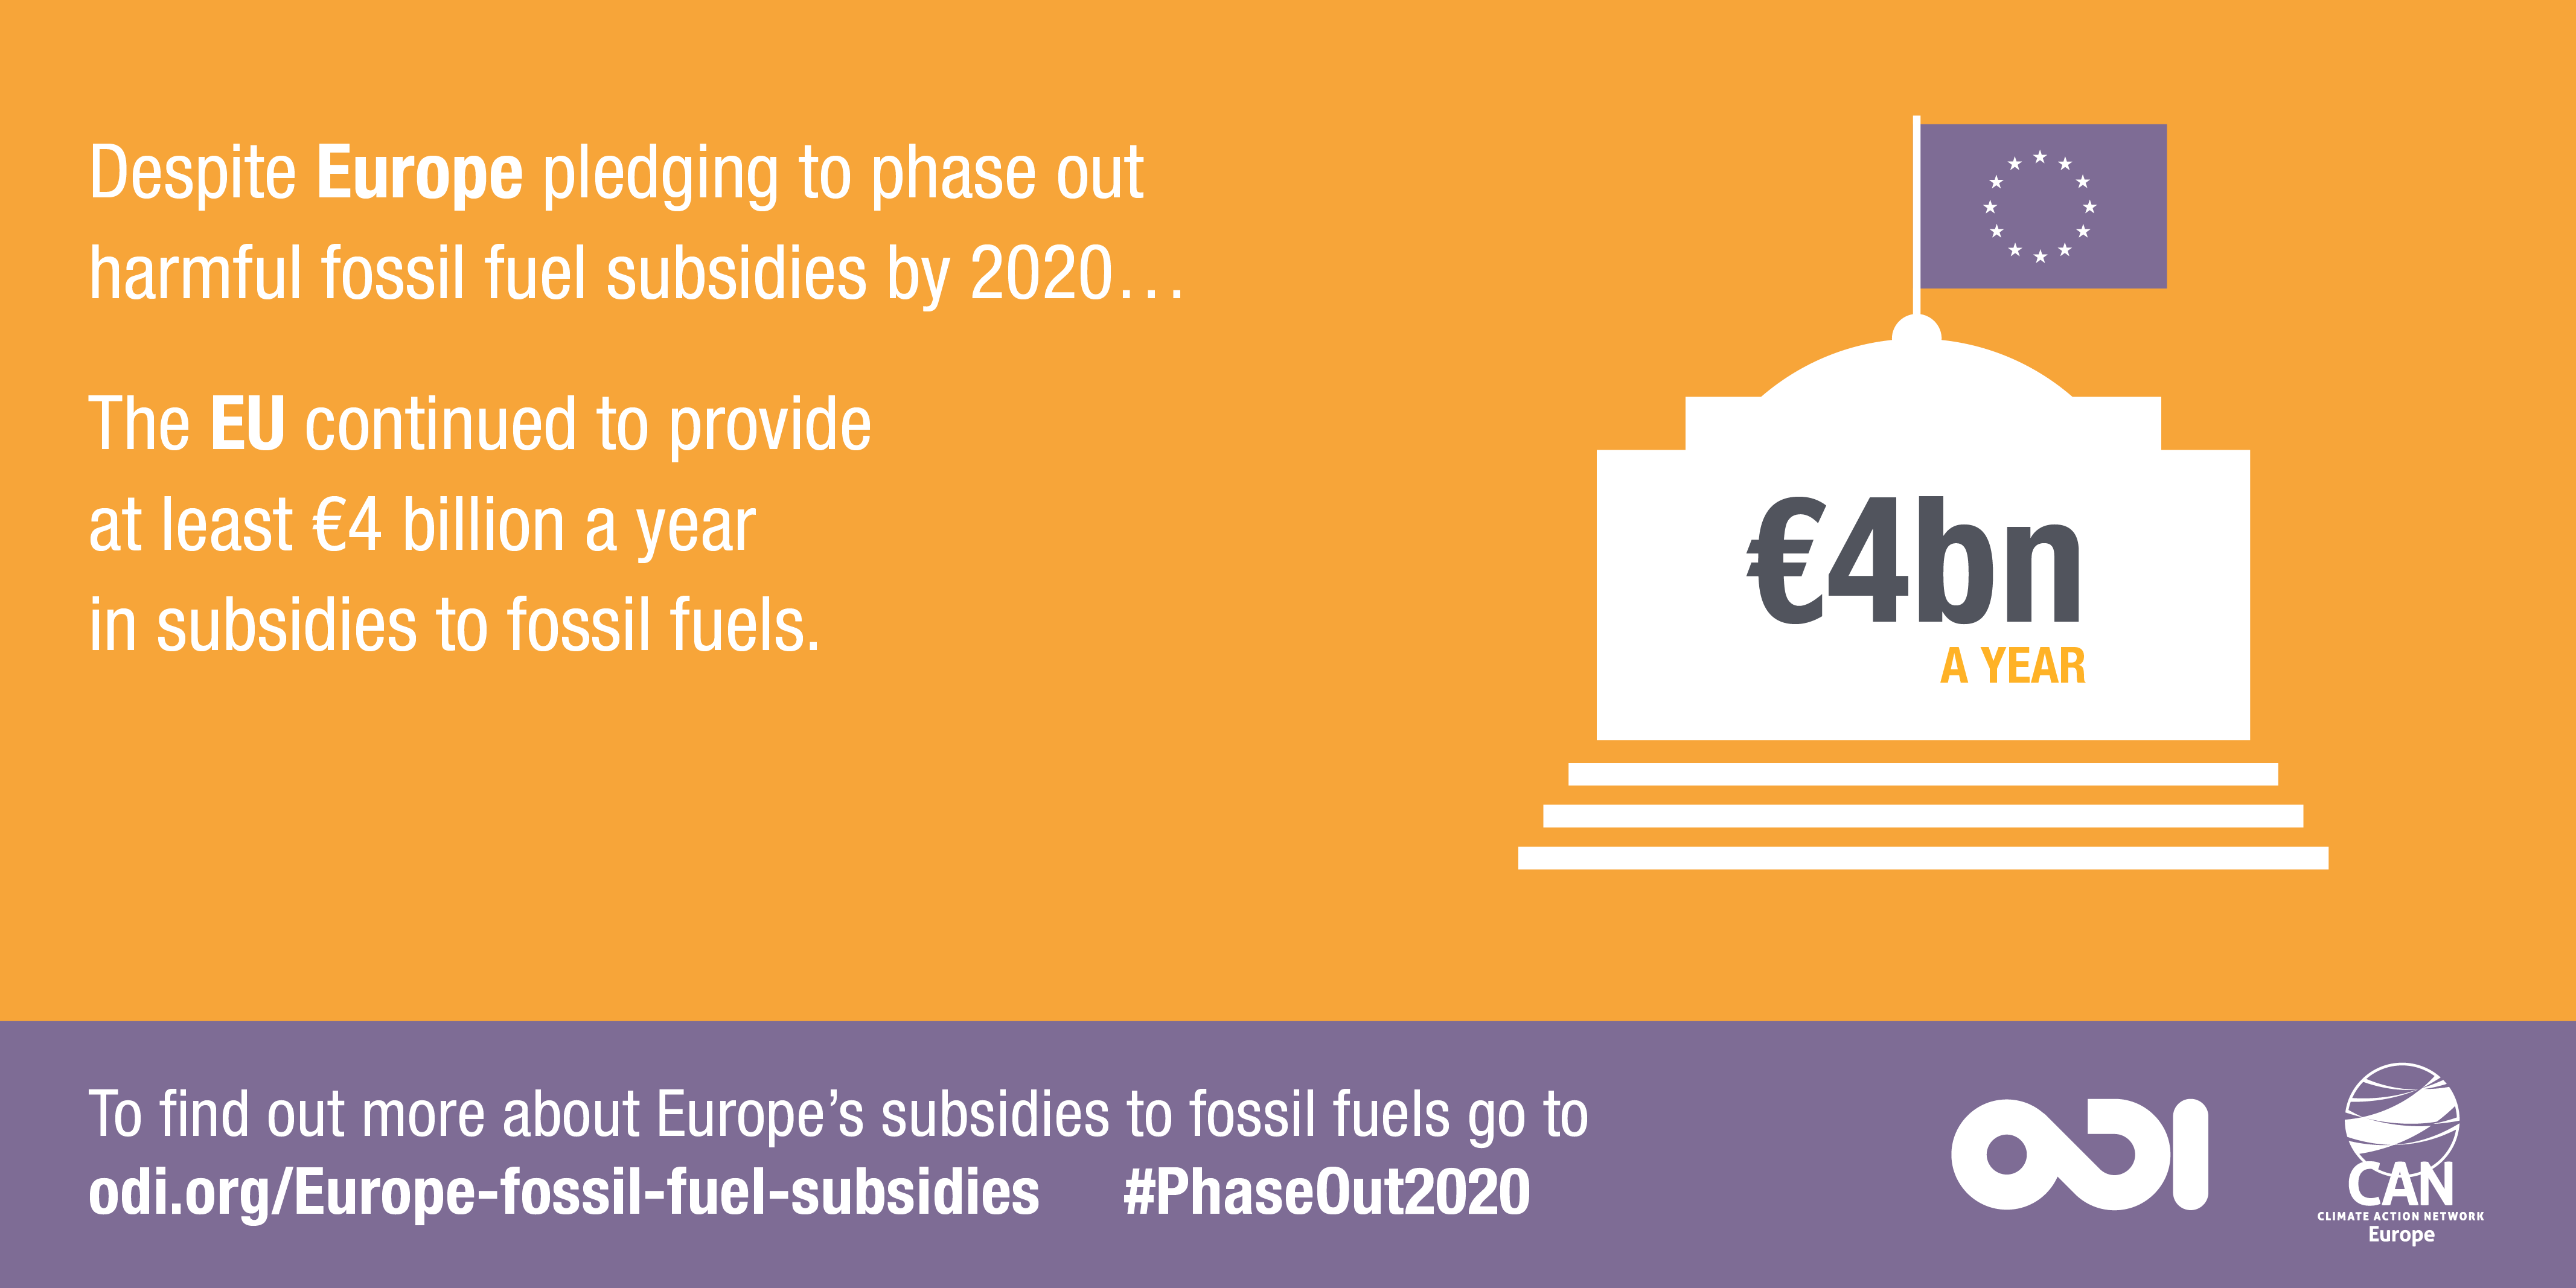 The EU continued to provide at least €4 billion a year in subsidies to fossil fuels. Image: Overseas Development Institute